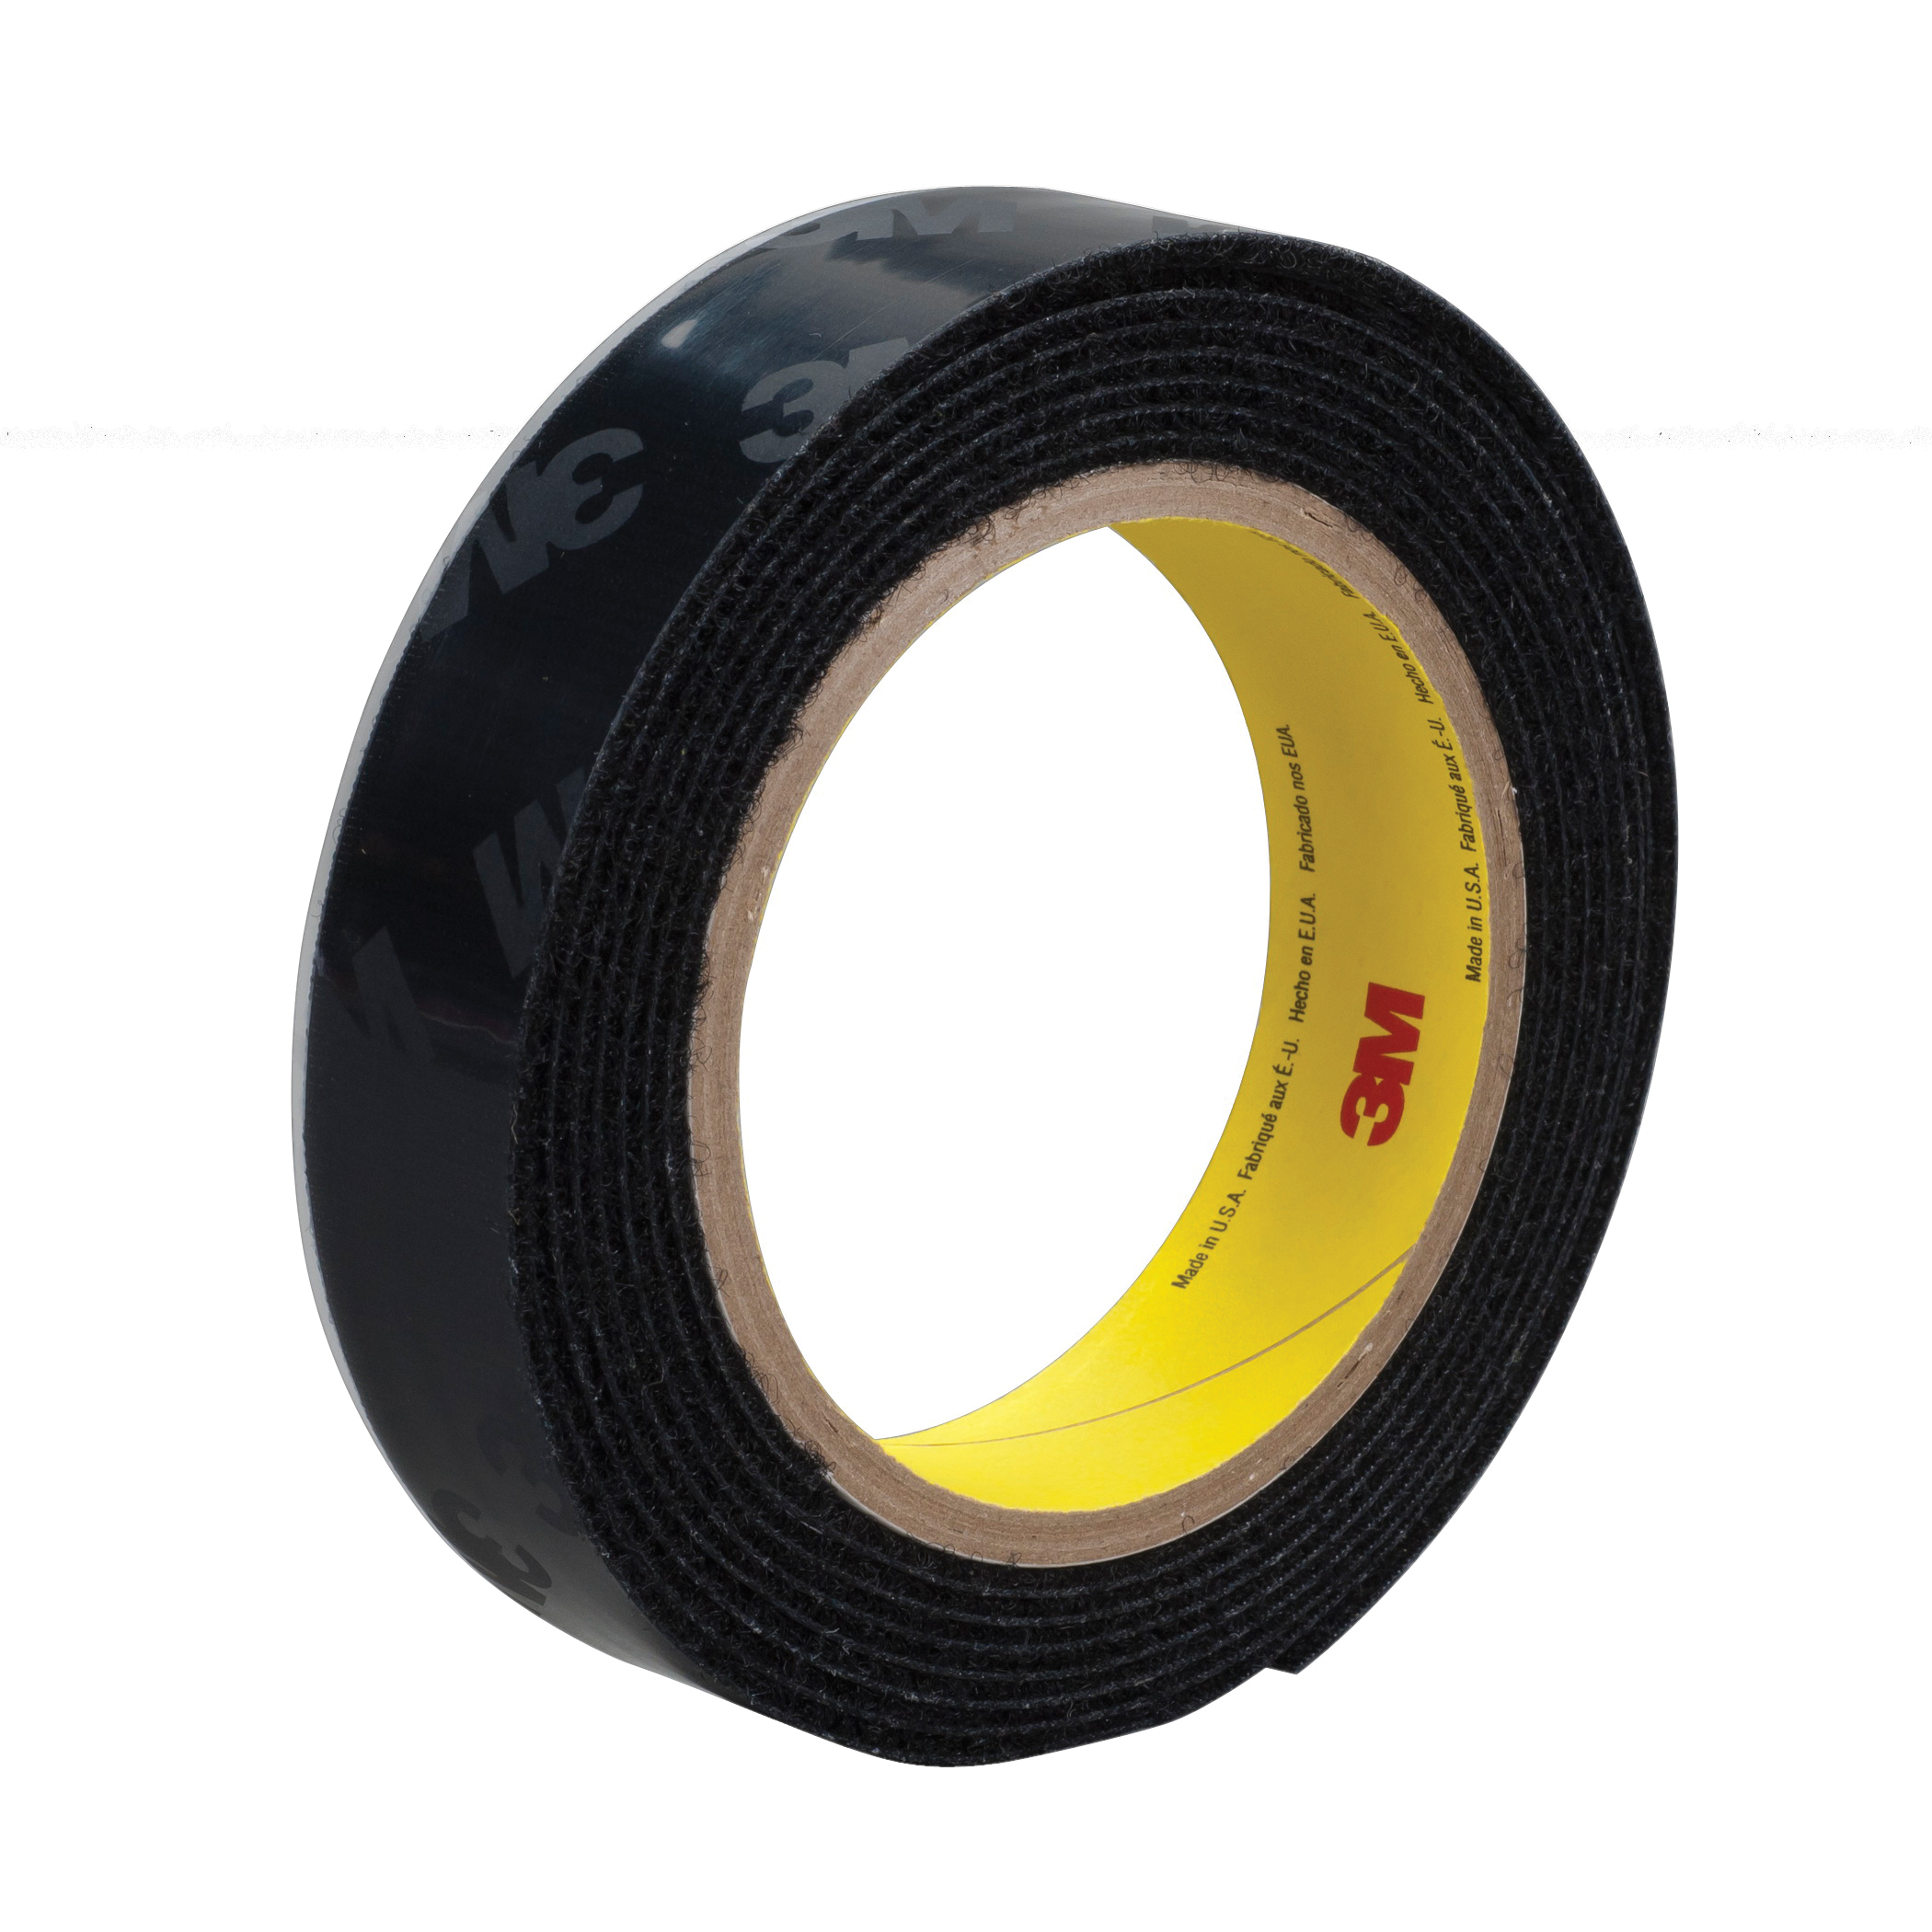 3M™ 021200-65613 General Performance Reclosable Hook Fastener Tape, 50 yd L x 1 in W, 0.15 in THK Engaged, High Tack Rubber Adhesive, Woven Nylon Backing, Black